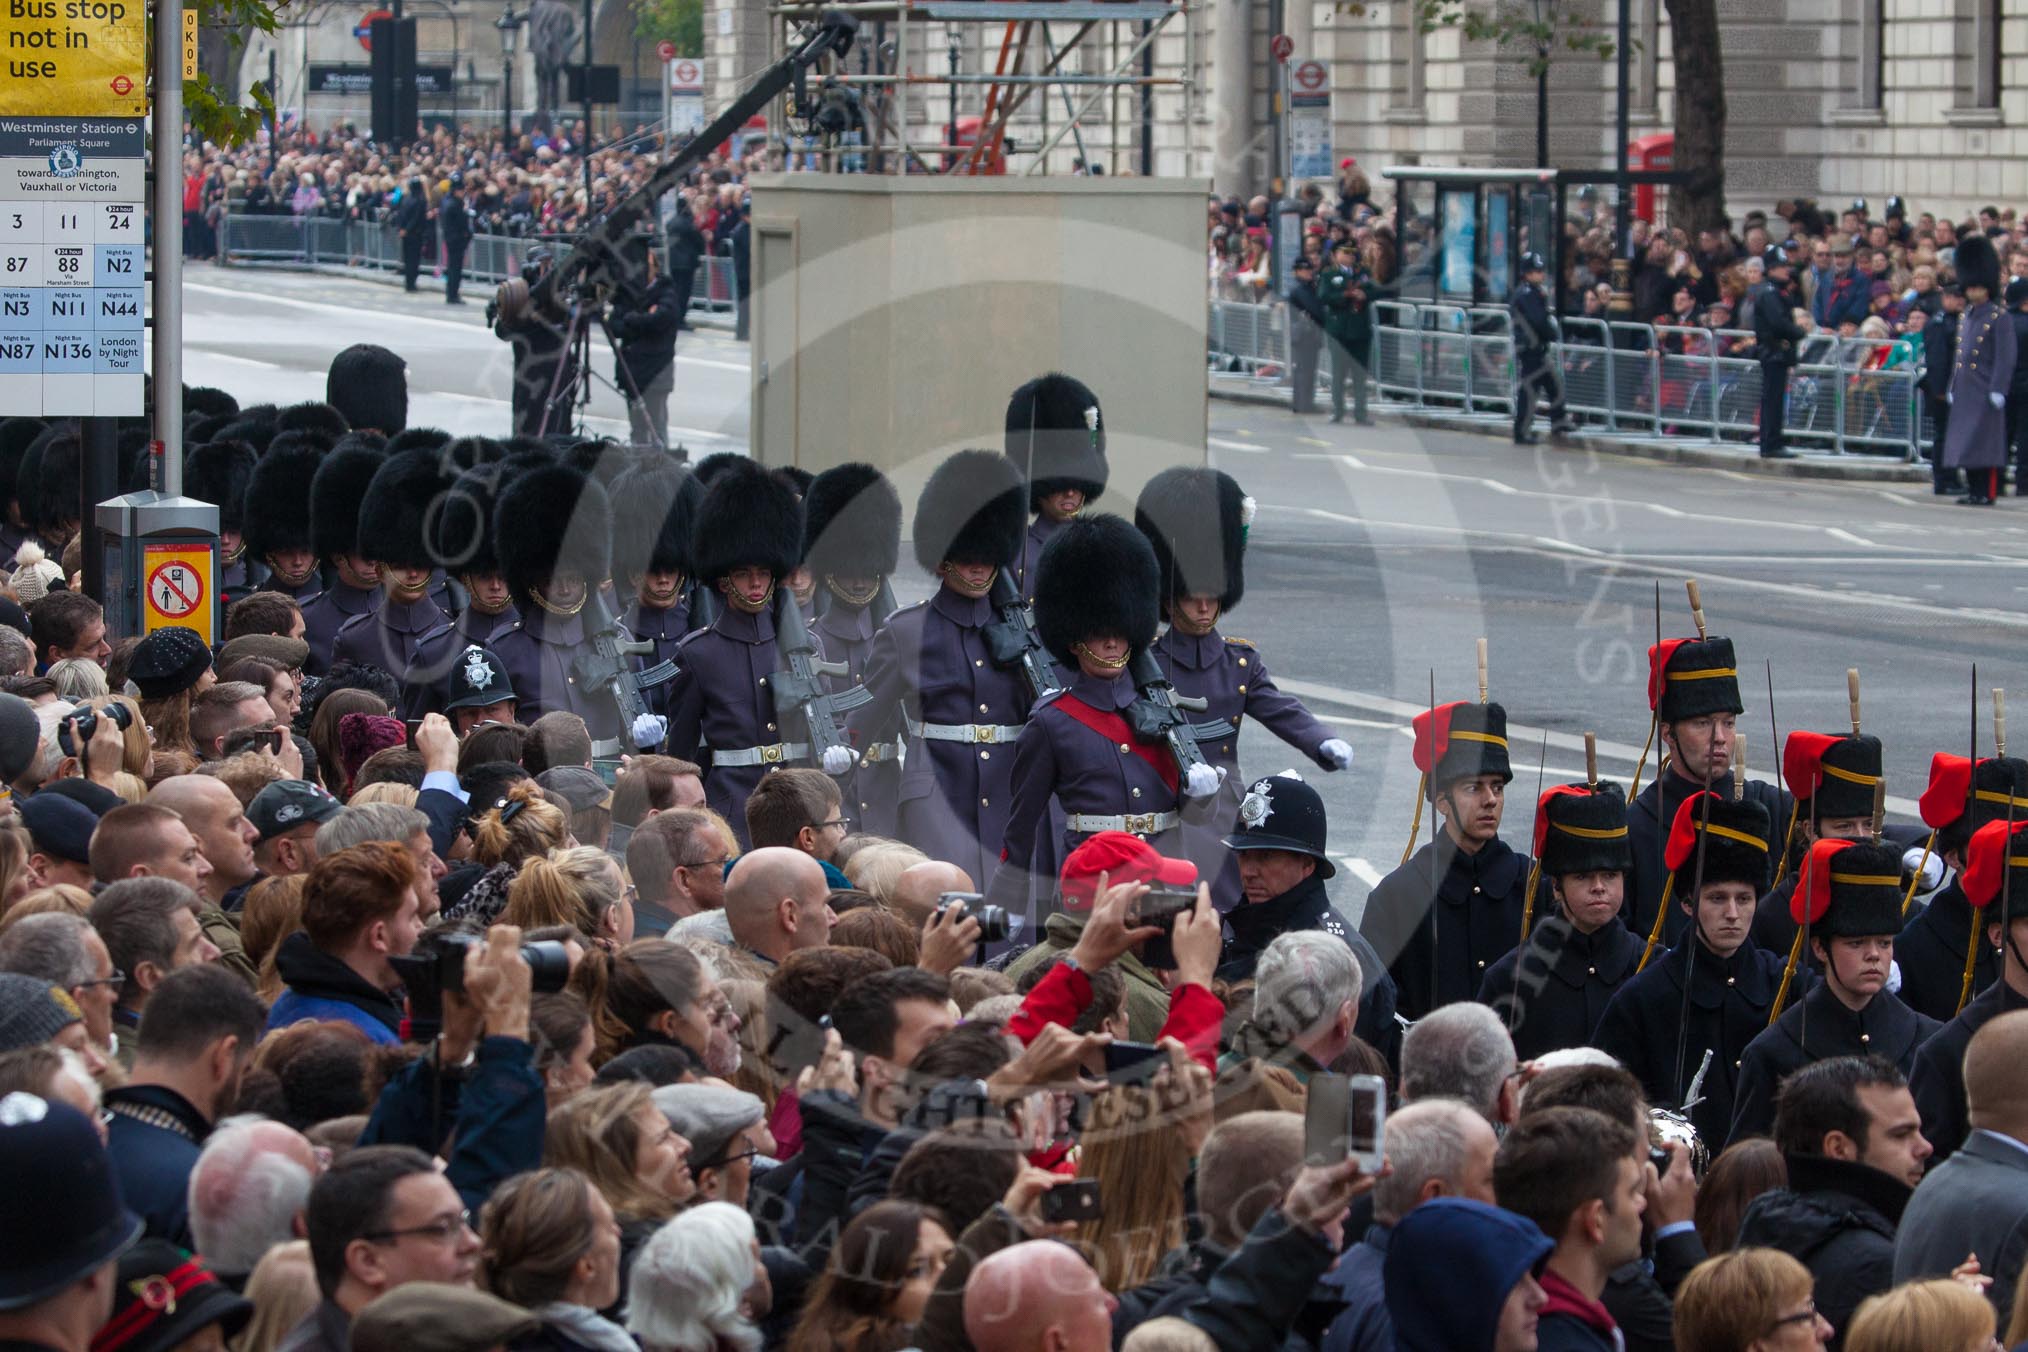 Remembrance Sunday at the Cenotaph in London 2014: The detachment of the Household Division Welsh Guards arrives at Whitehall. In front of them the King's Troop Royal Horse Artillery.
Press stand opposite the Foreign Office building, Whitehall, London SW1,
London,
Greater London,
United Kingdom,
on 09 November 2014 at 10:25, image #63